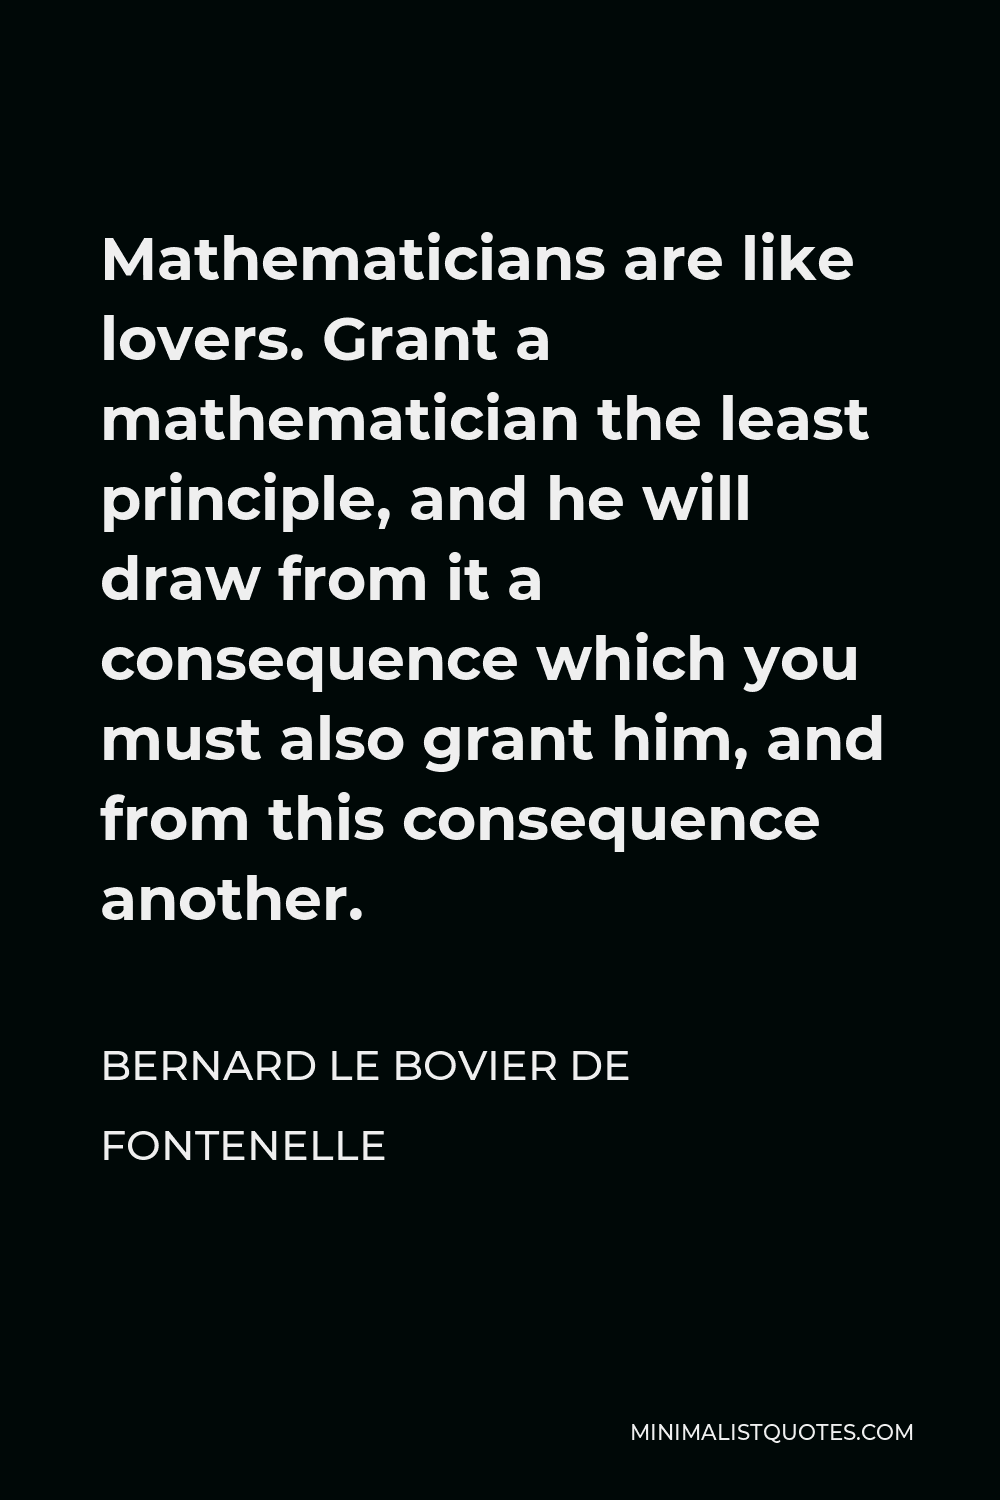 Bernard le Bovier de Fontenelle Quote - Mathematicians are like lovers. Grant a mathematician the least principle, and he will draw from it a consequence which you must also grant him, and from this consequence another.